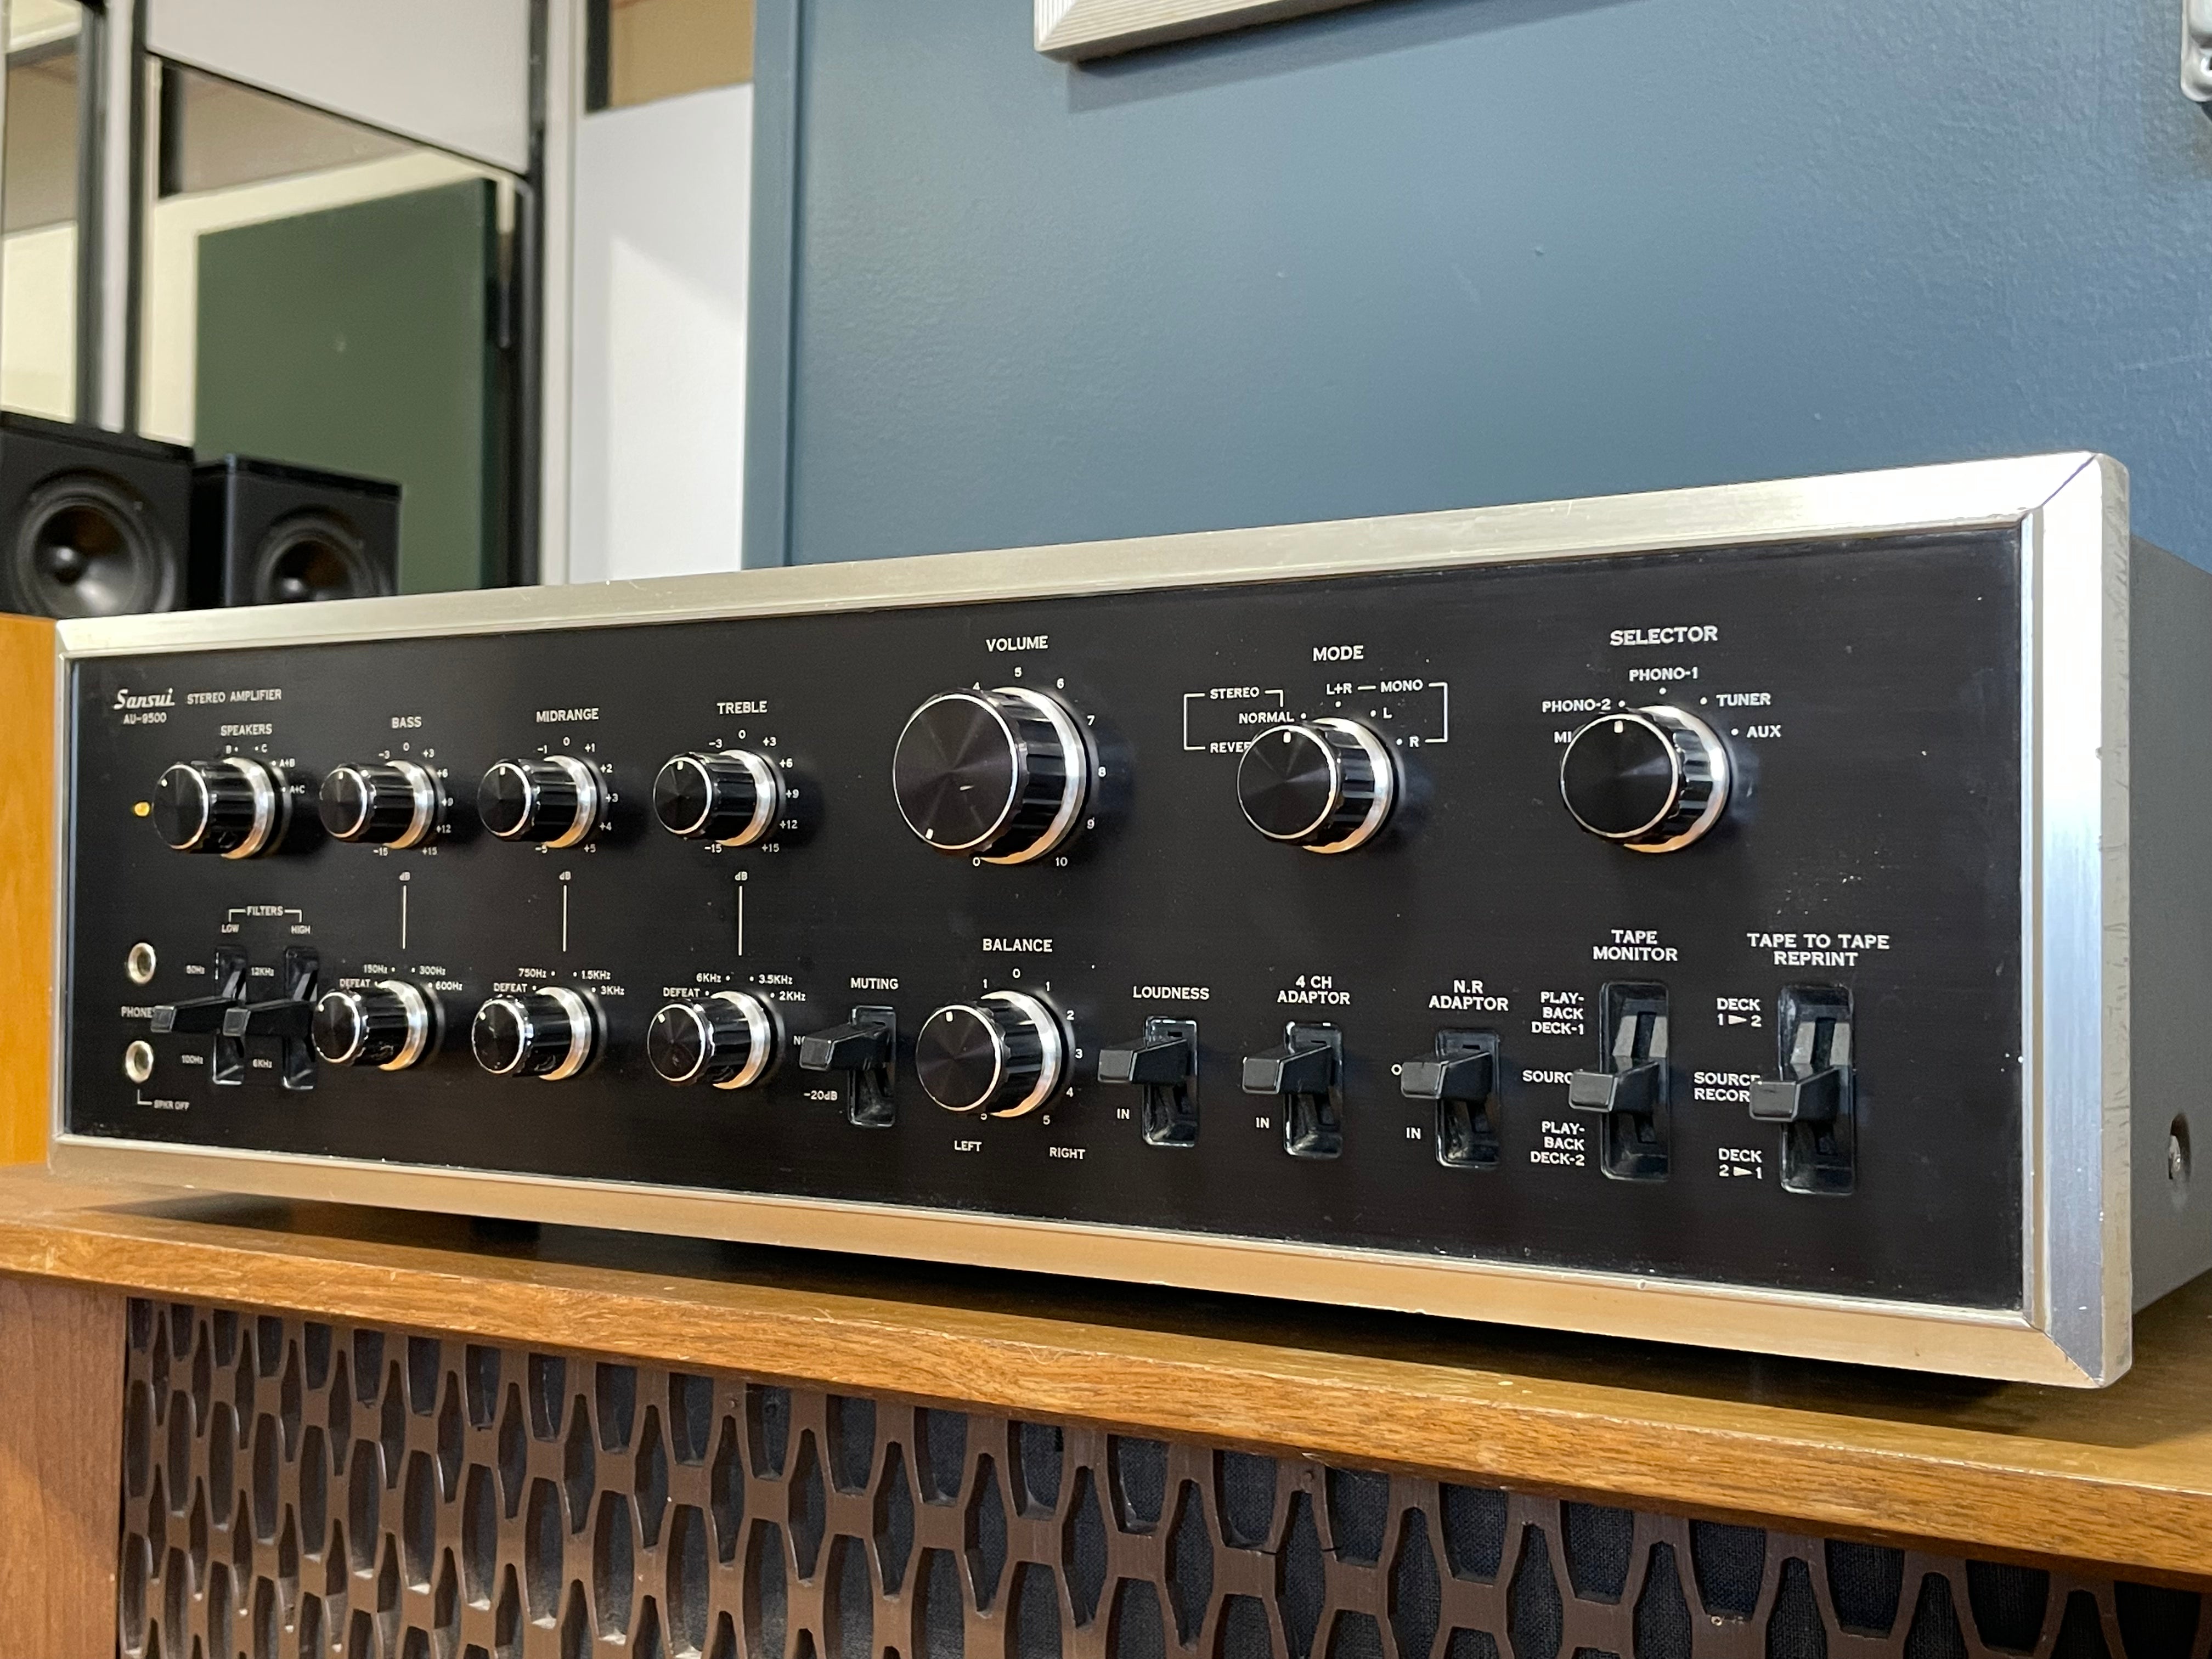 Sansui, AU-9500 "One of the Greatest Vintage Integrated Amps Ever!" - SOLD